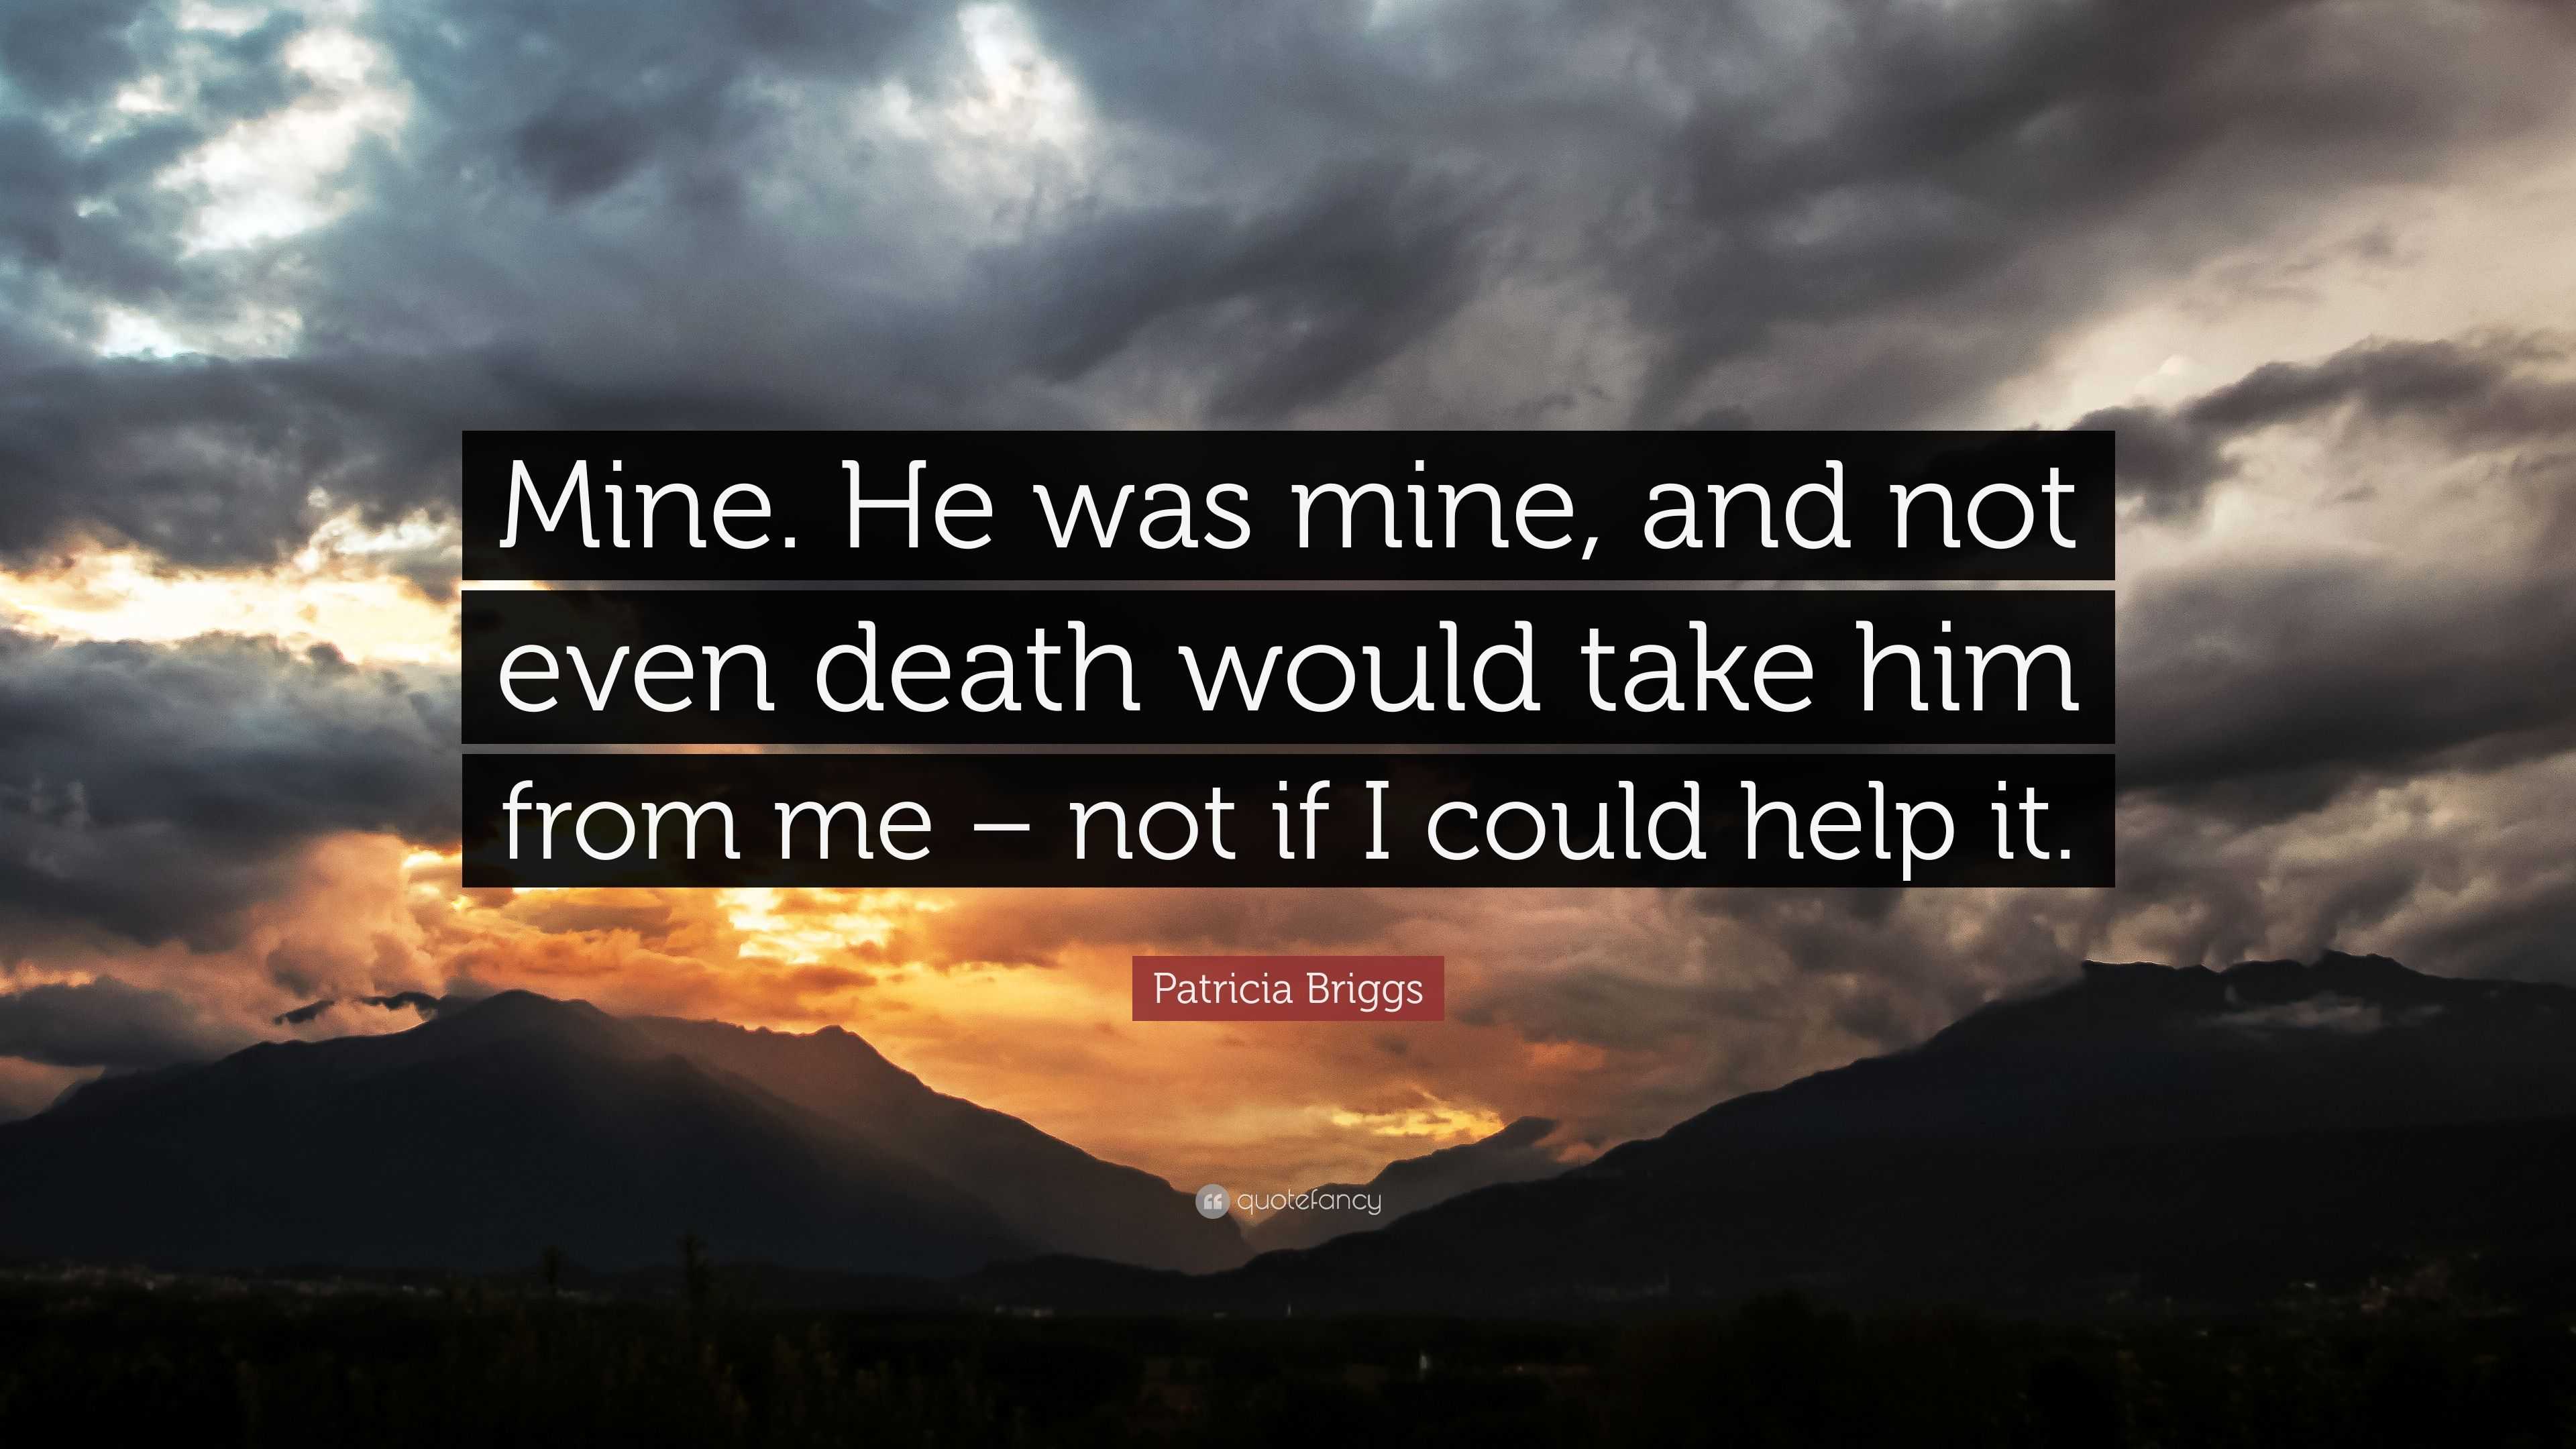 Patricia Briggs Quote: “Mine. He was mine, and not even death would ...